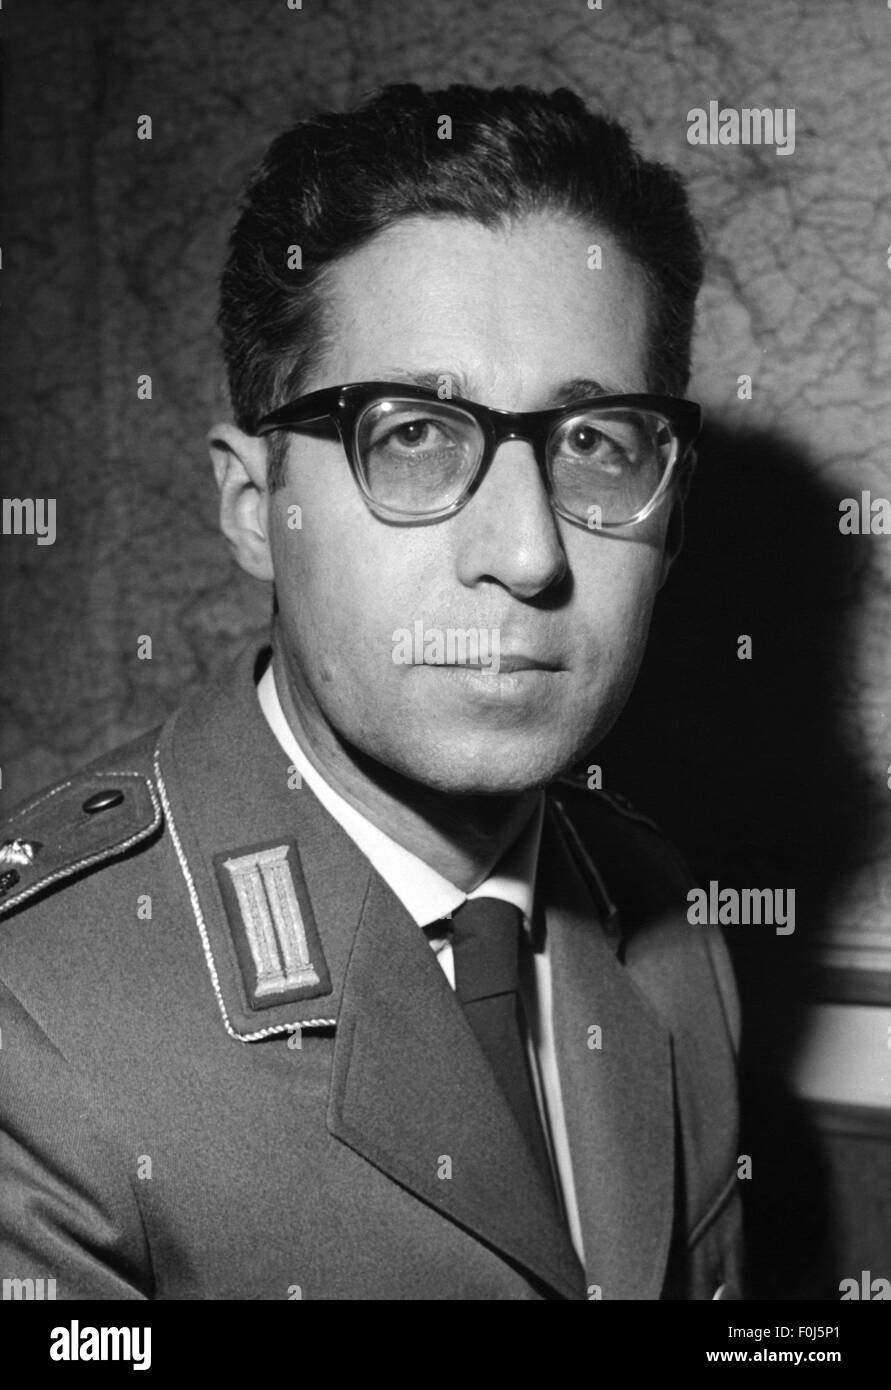 Schmueckle, Gerd, 1.12.1917 - 28.5.2013, German general, press agent of the Federal Ministry for Defence 1957 - 1962, portrait, circa 1961, Stock Photo